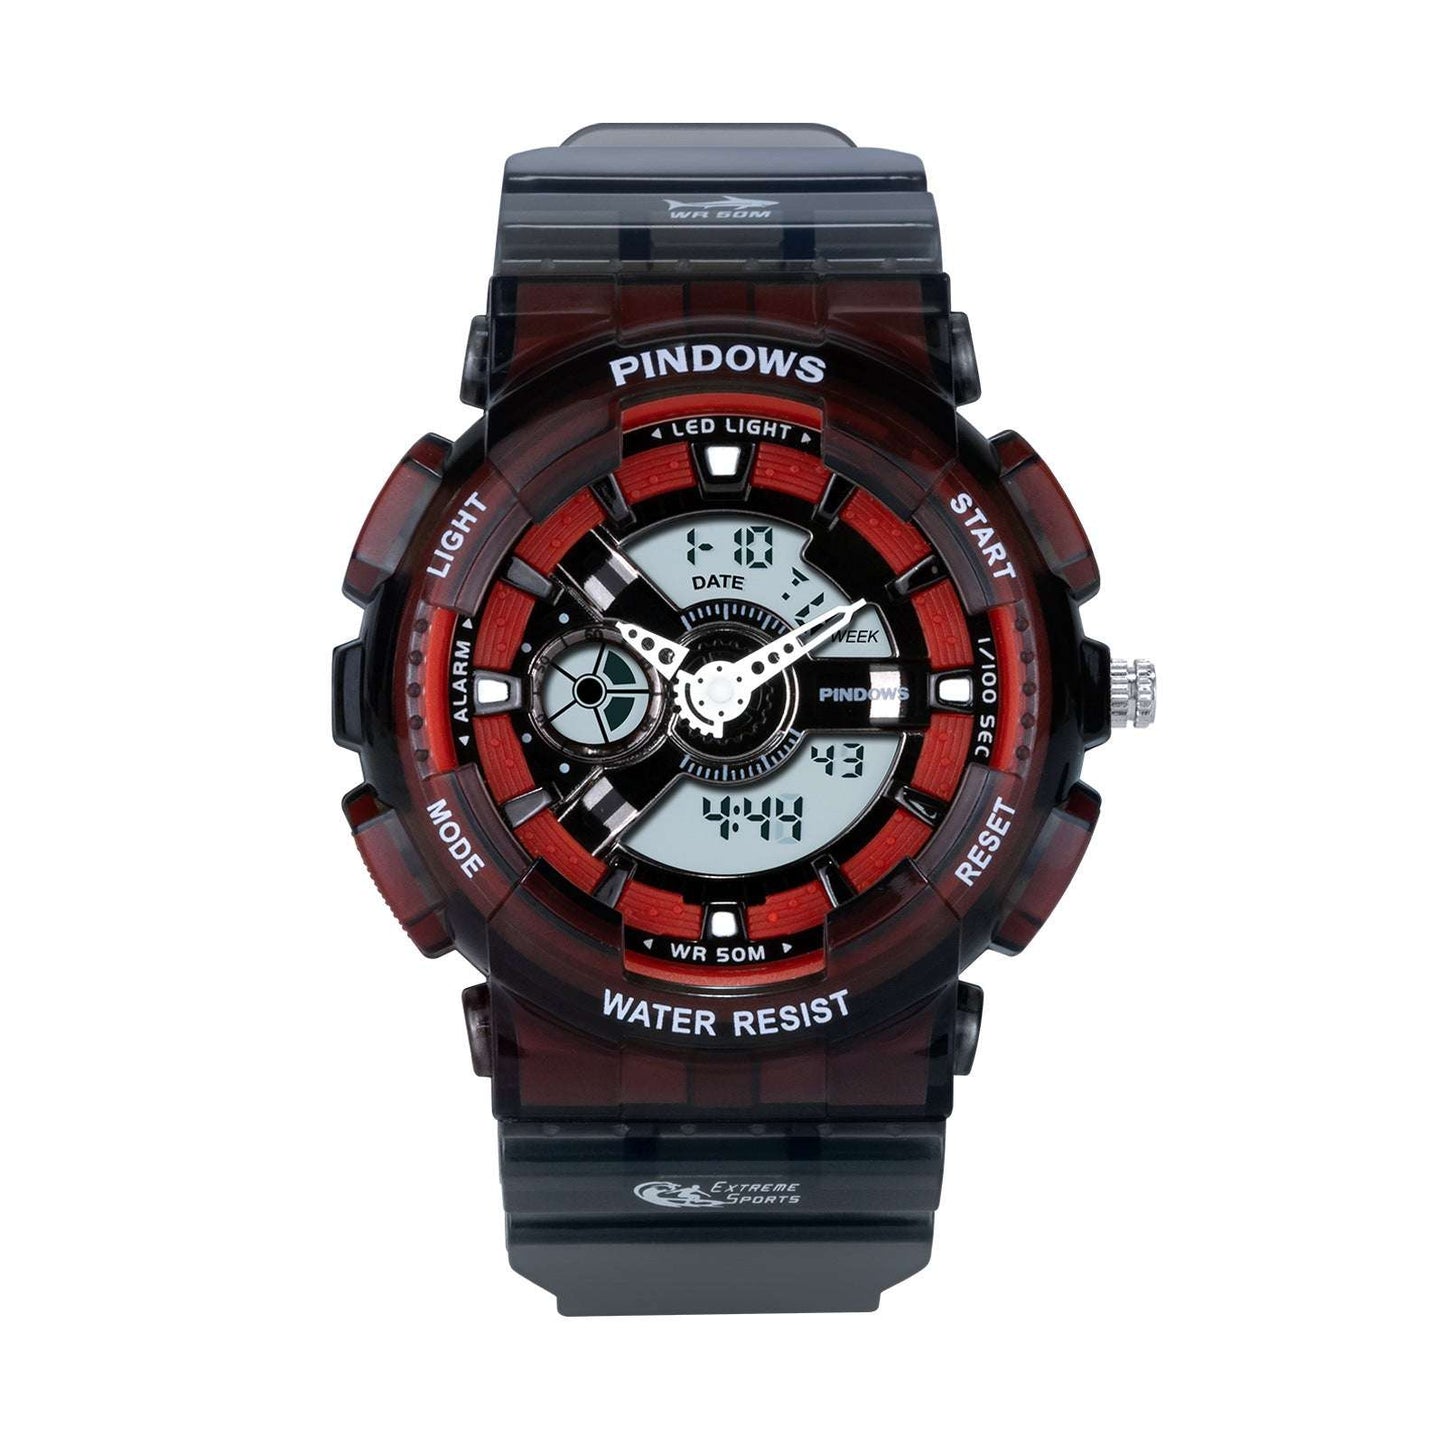 autopostr_pinterest_64088, Boys' Sports Watch, Colorful Boys' Watch, Outdoor Electronic Watch - available at Sparq Mart